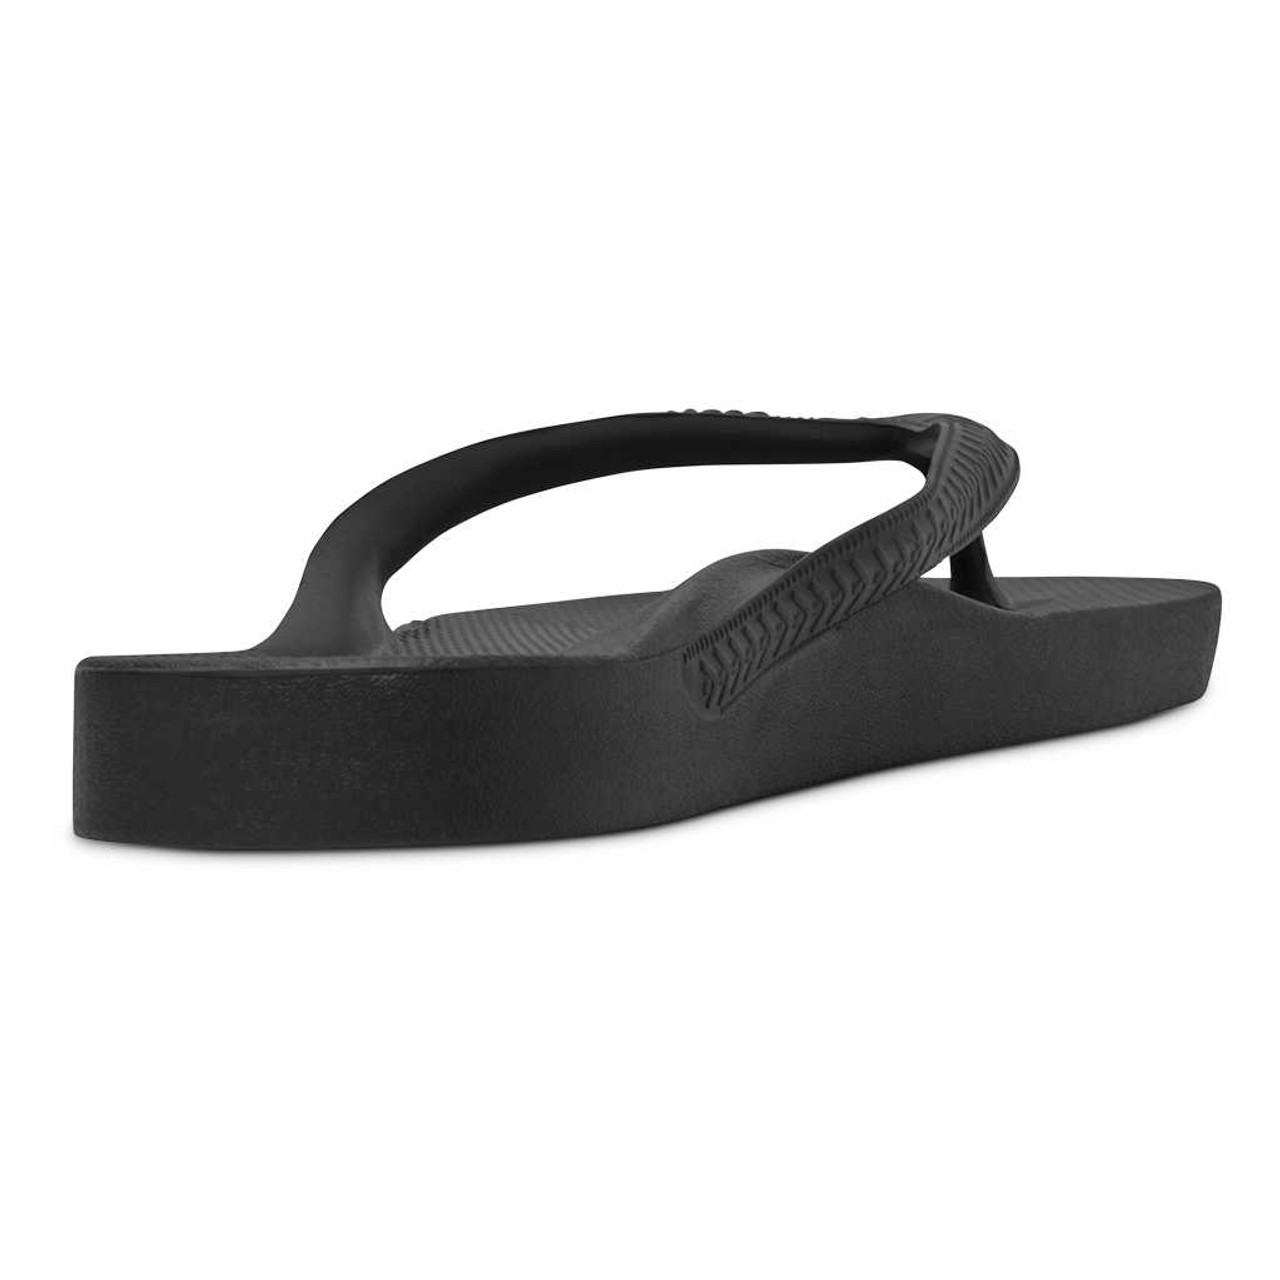 Arch Support Thongs - Archies